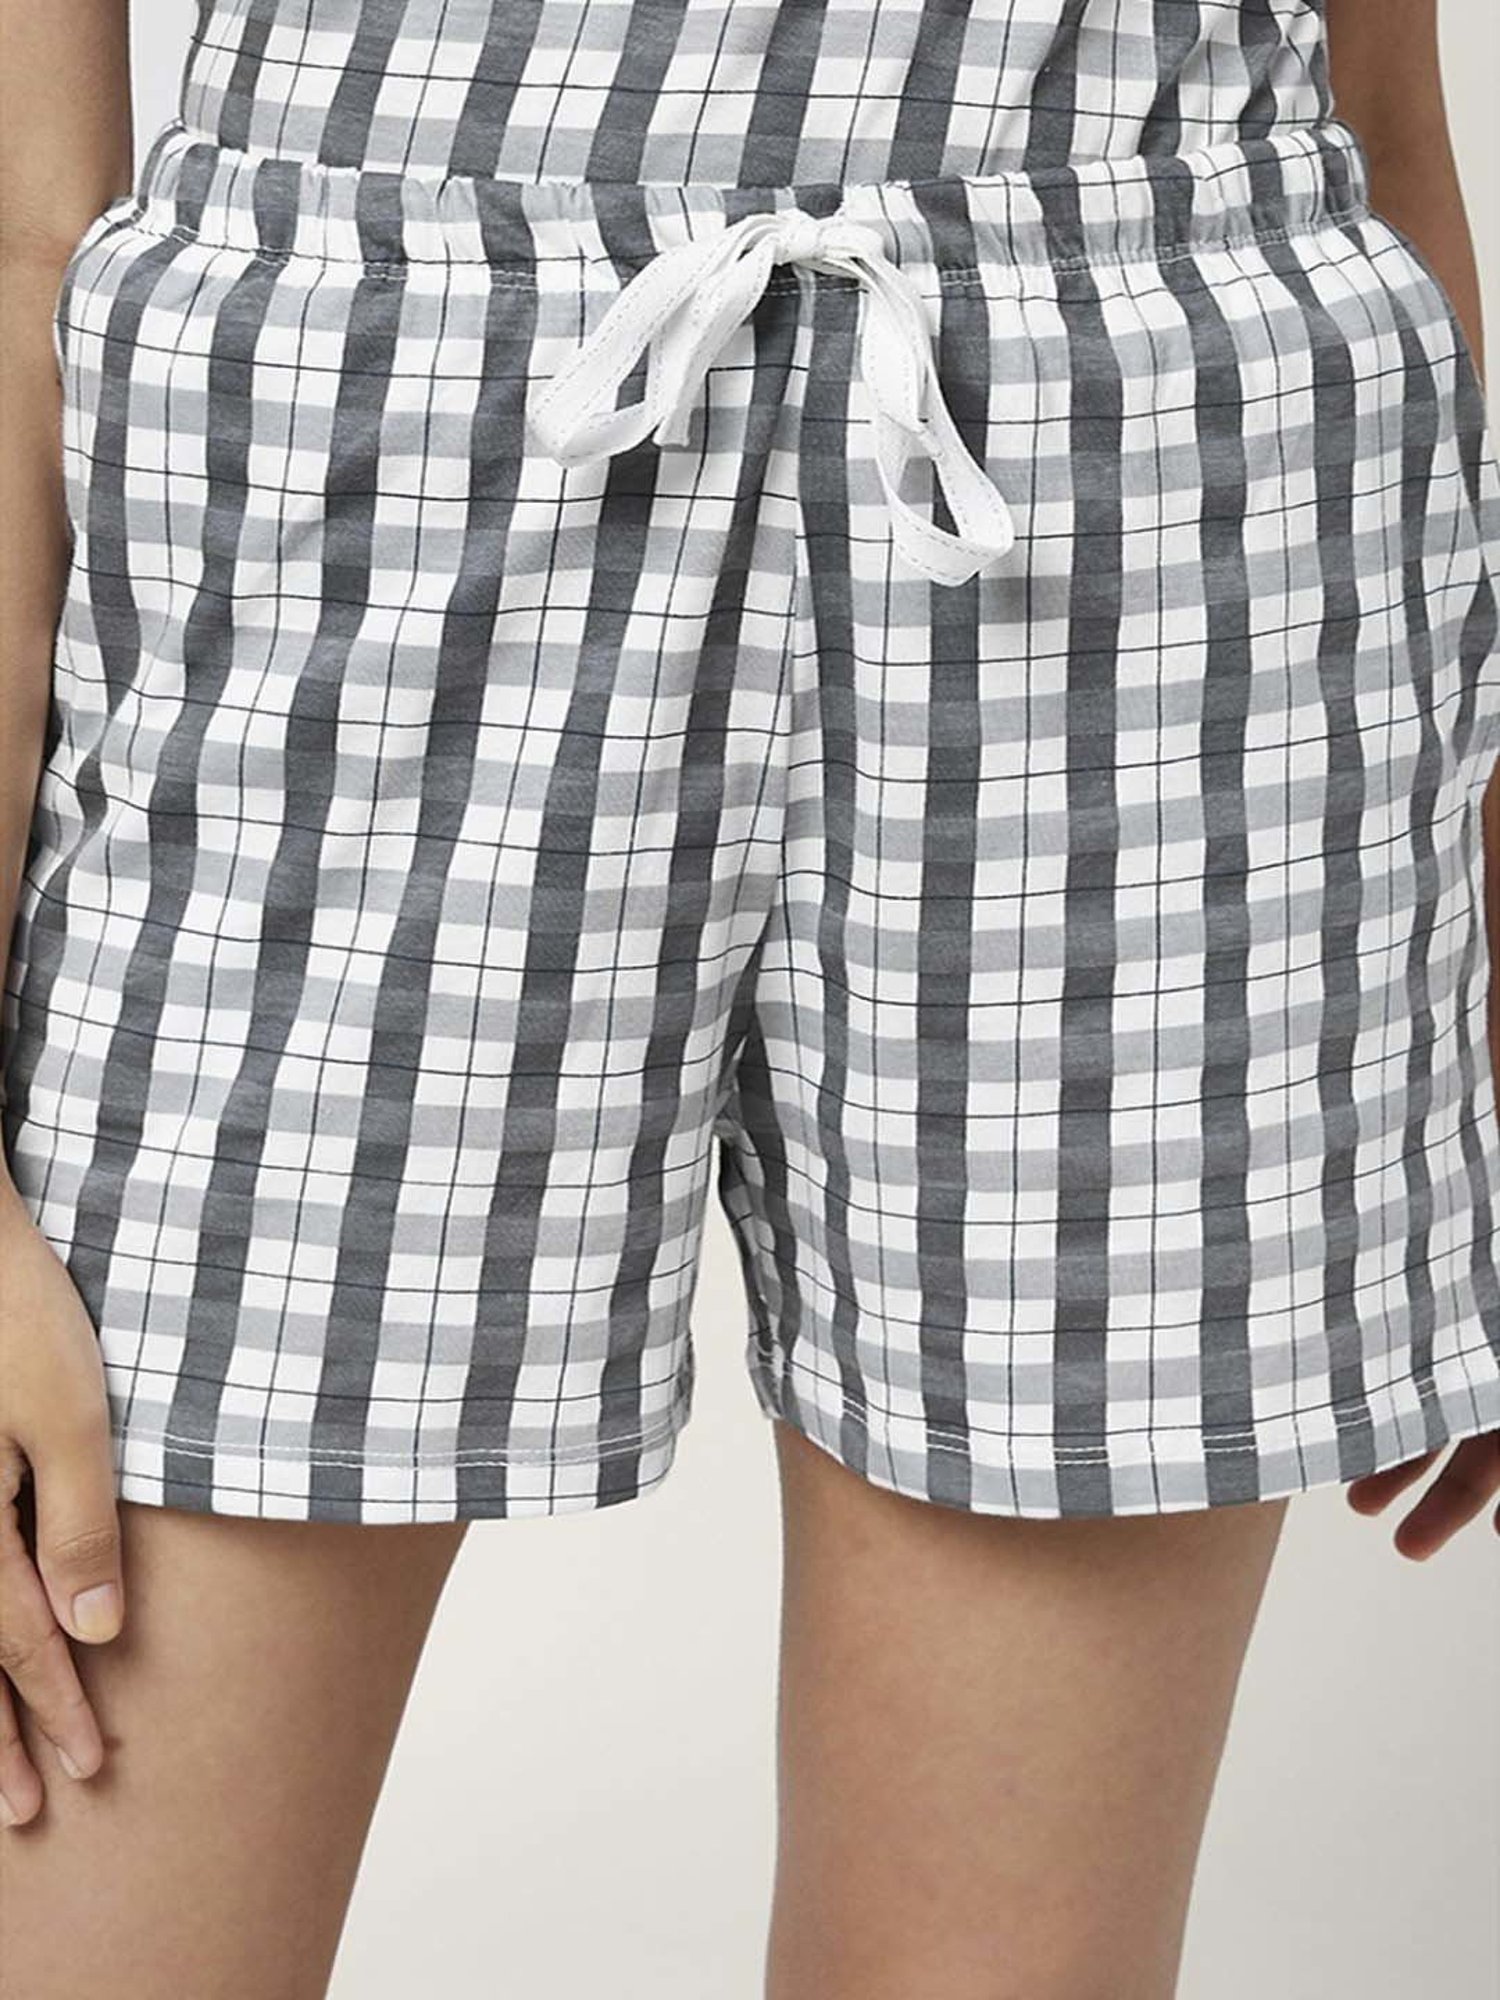 Dreamz by Pantaloons Grey White Cotton Chequered Top Shorts Set